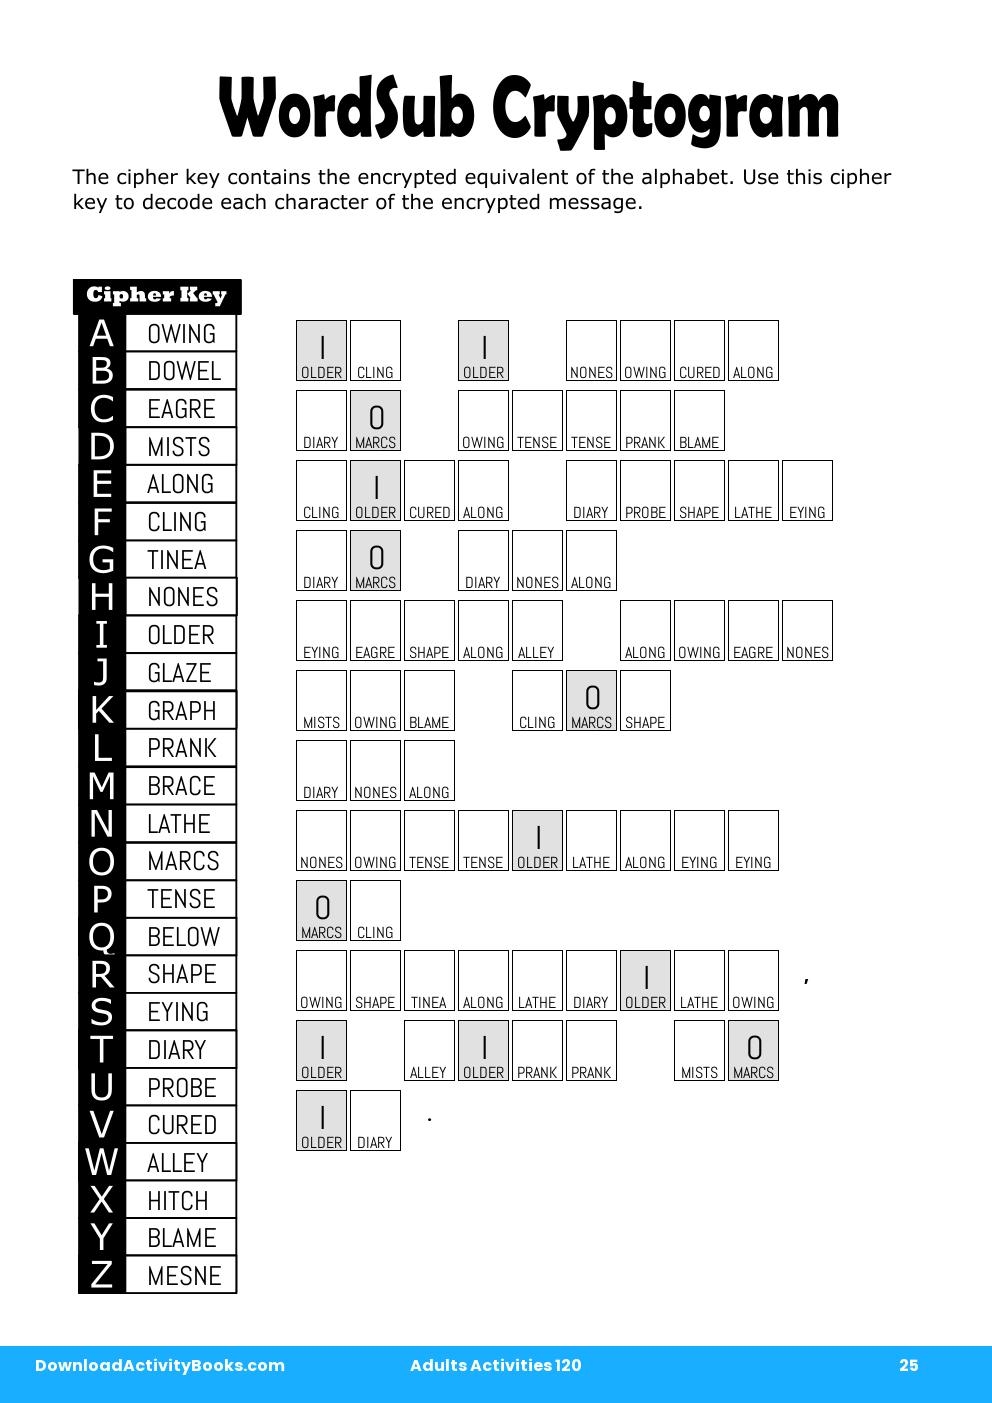 WordSub Cryptogram in Adults Activities 120